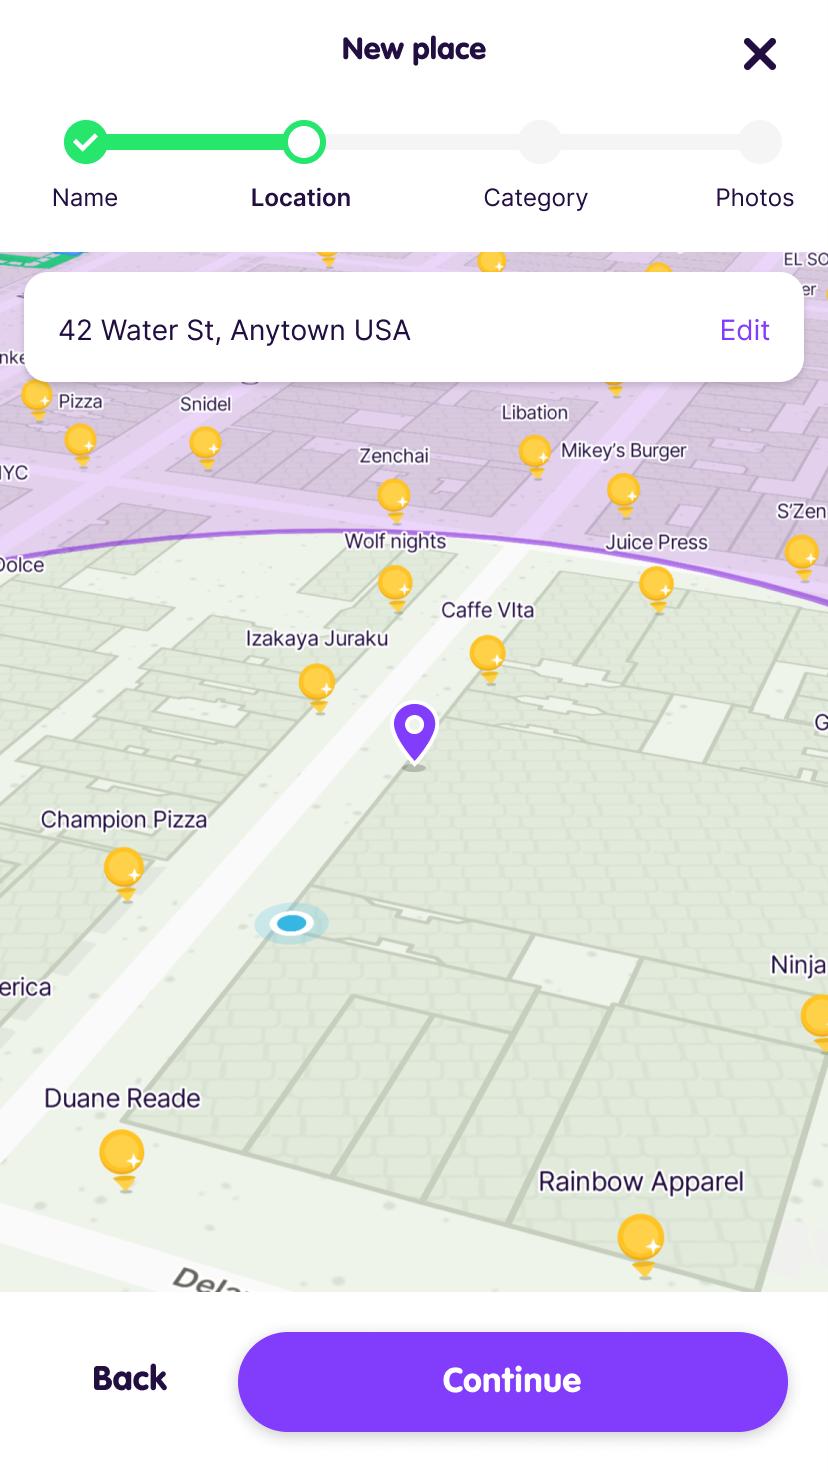 The Location screen of the Add Place flow